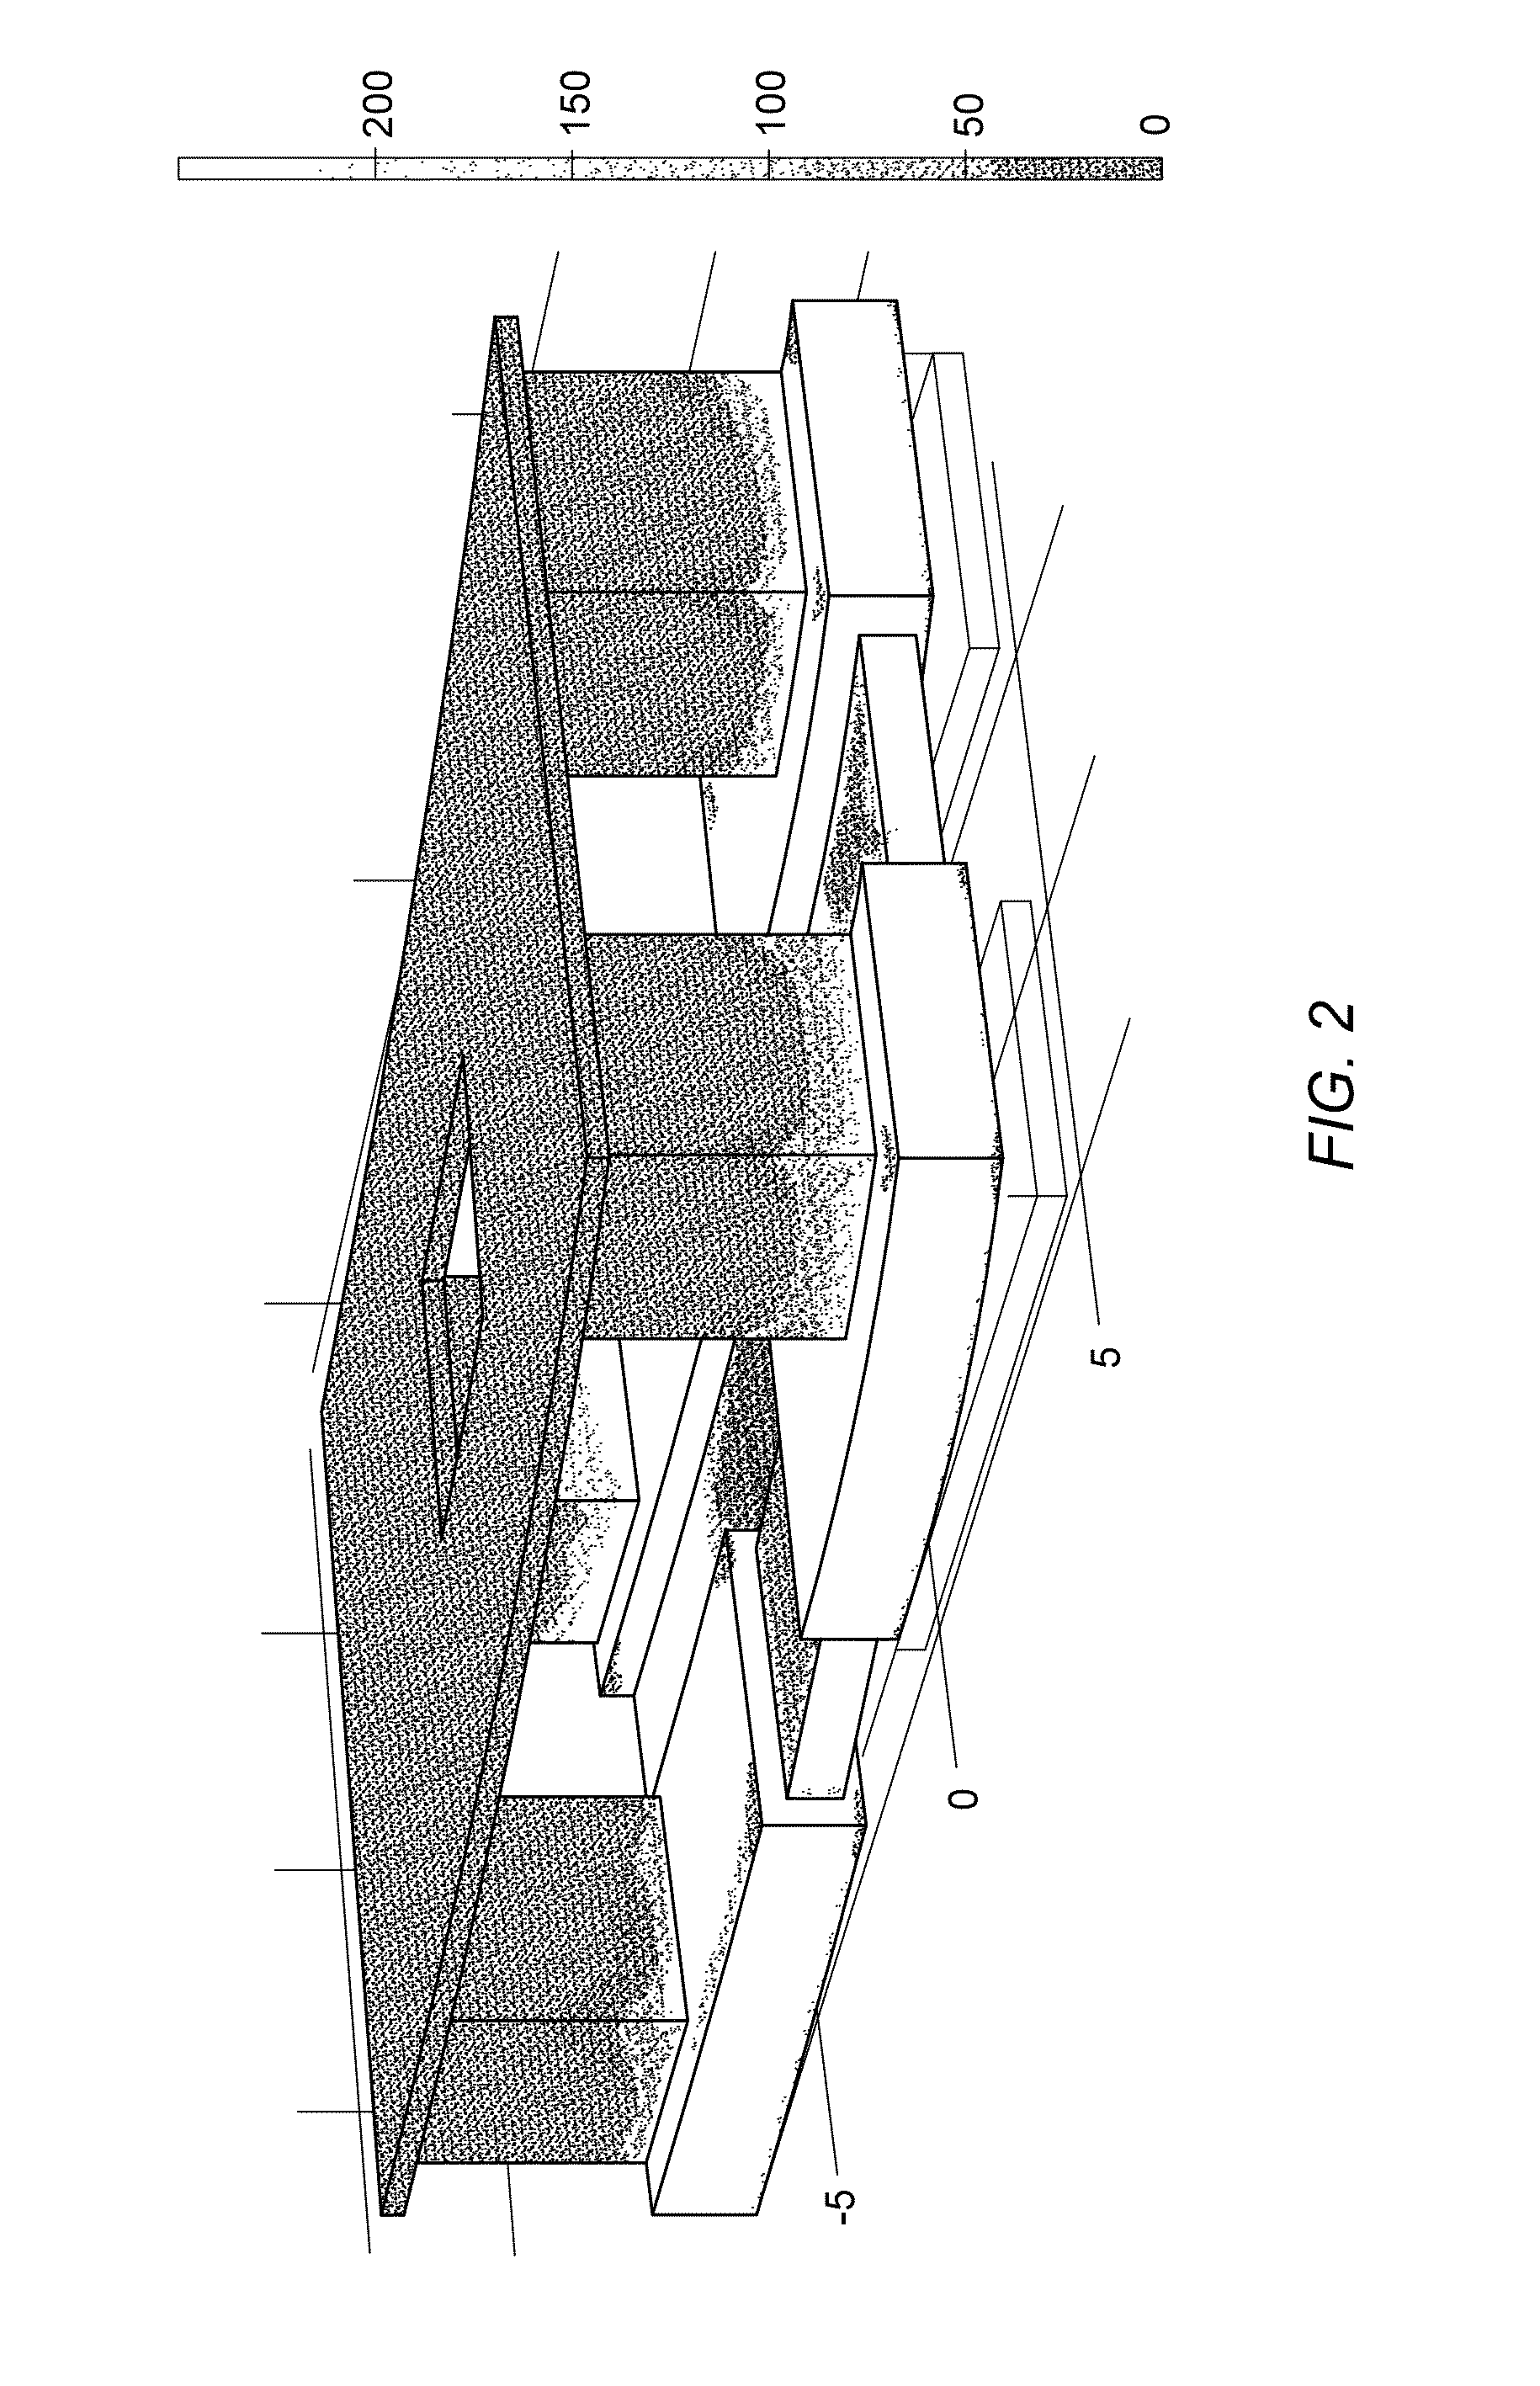 Thermoelectric devices having reduced thermal stress and contact resistance, and methods of forming and using the same